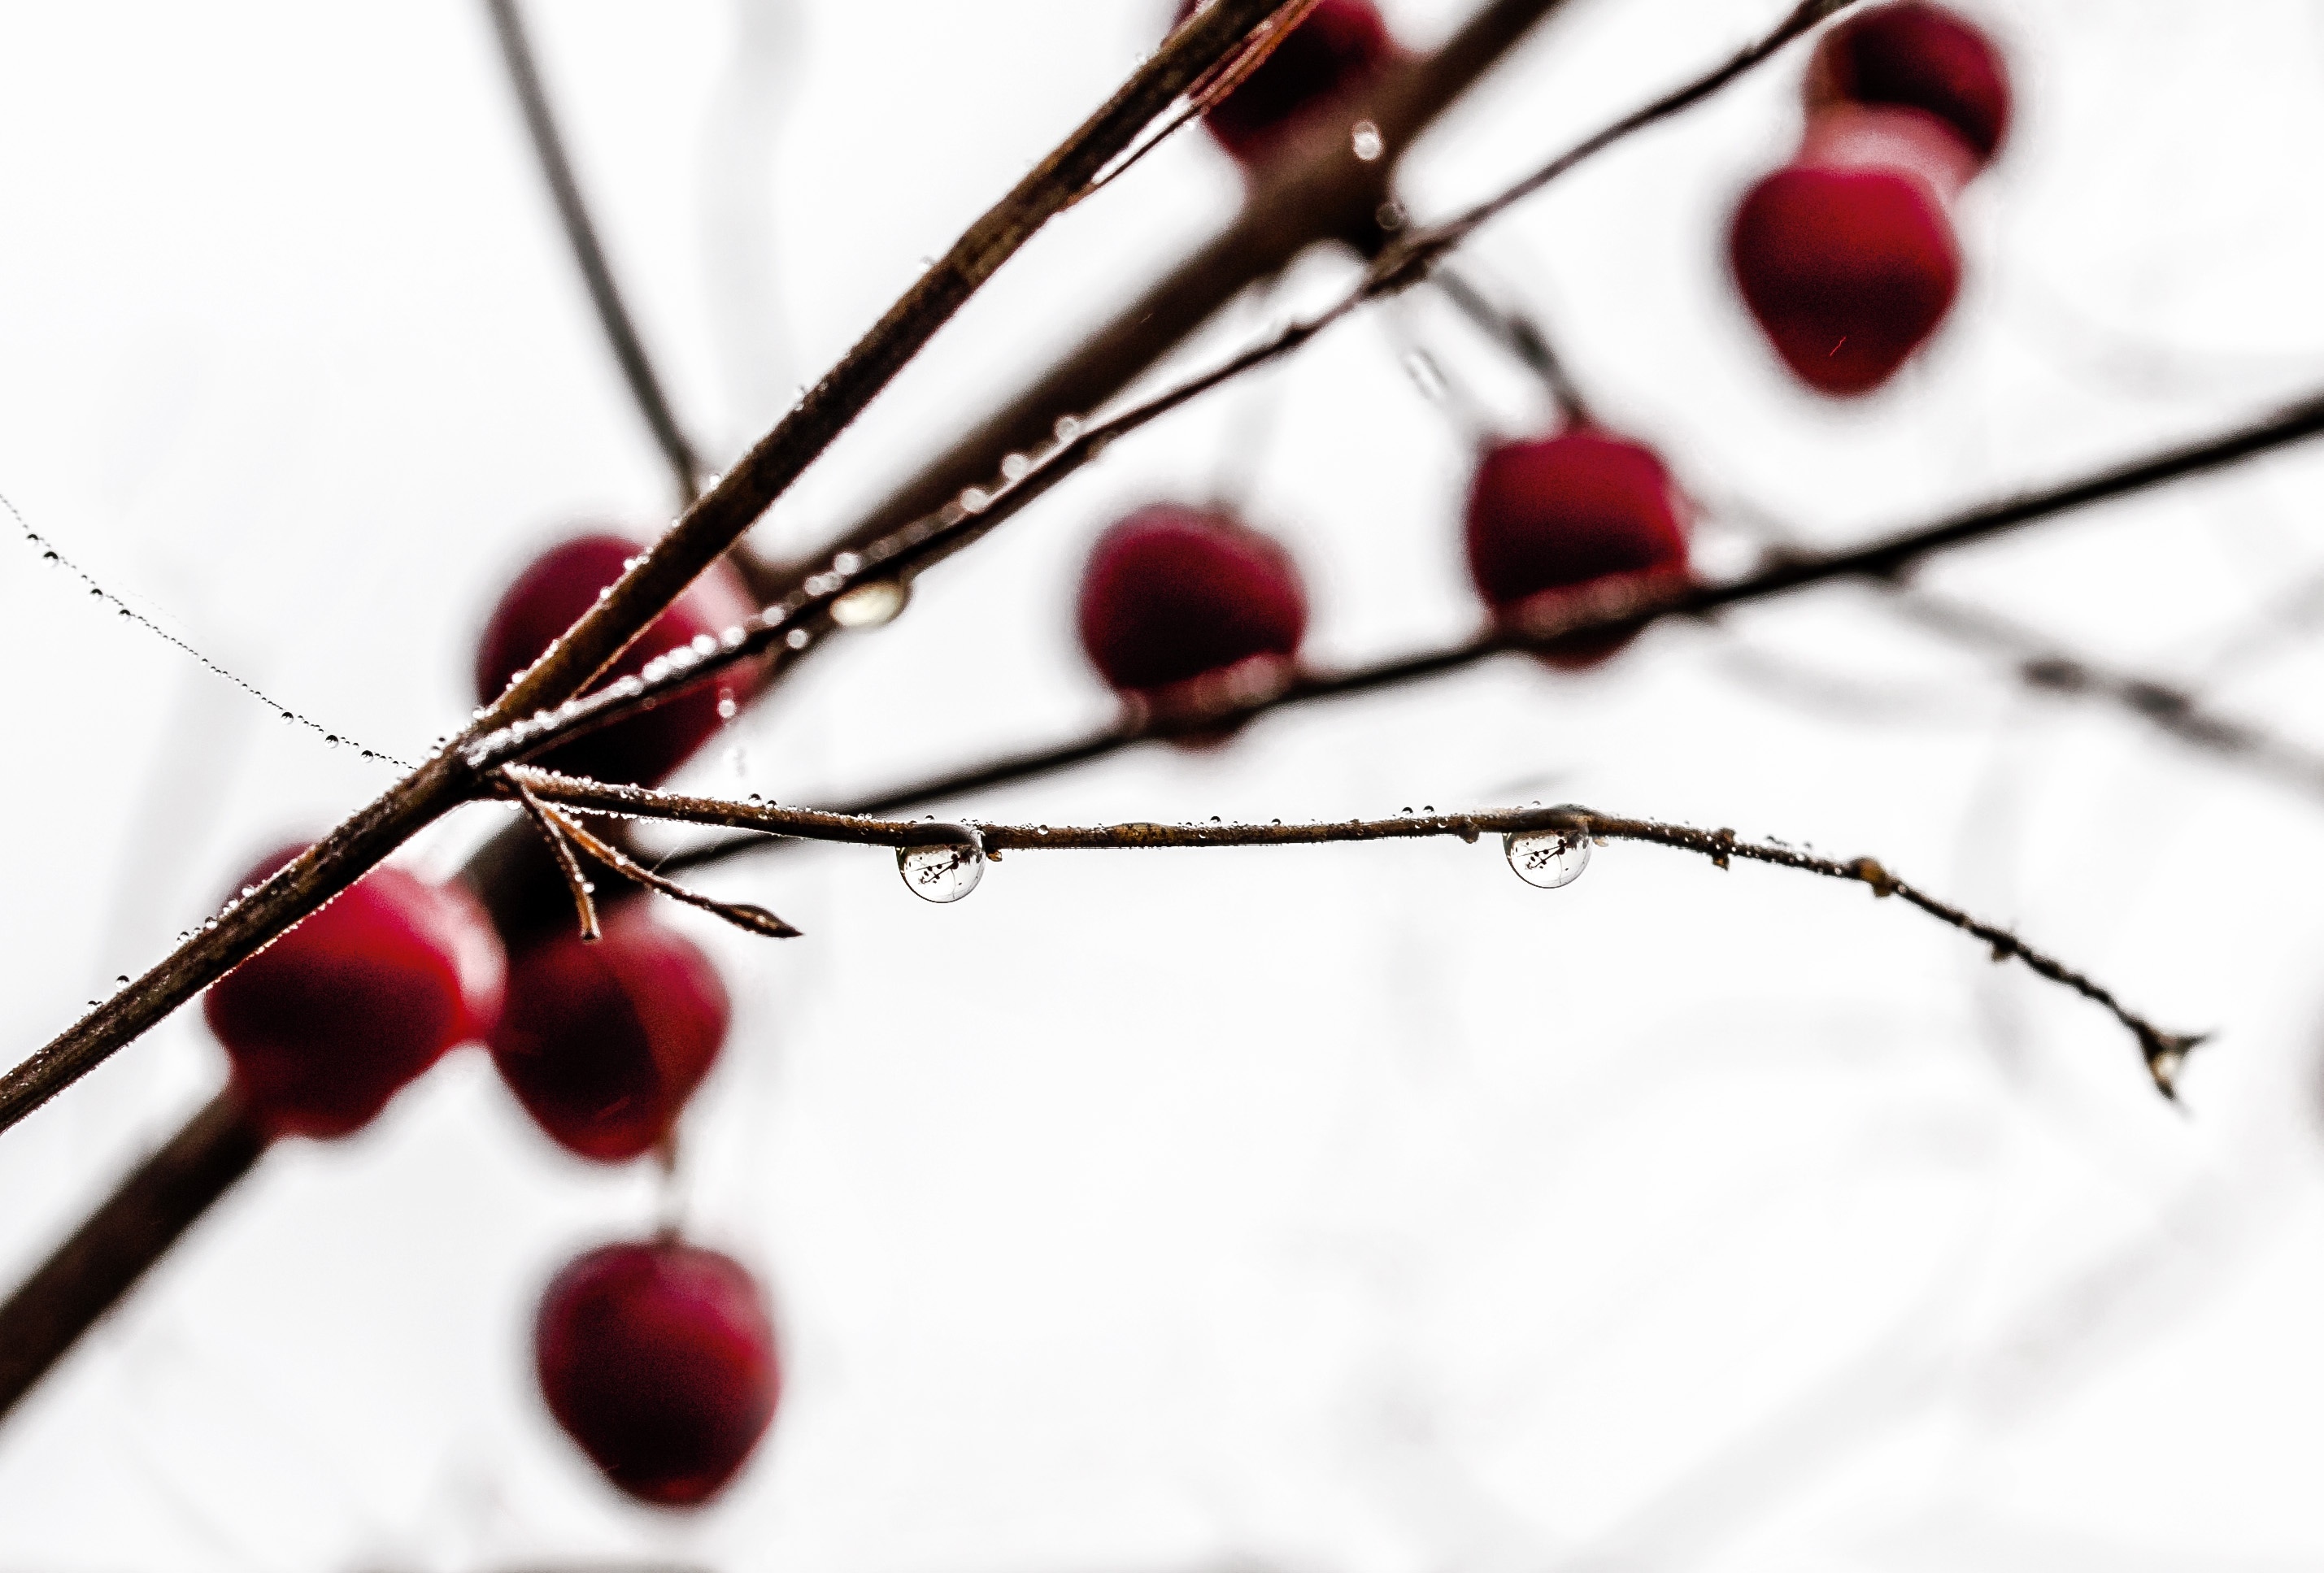 red round small fruits in bokeh photography